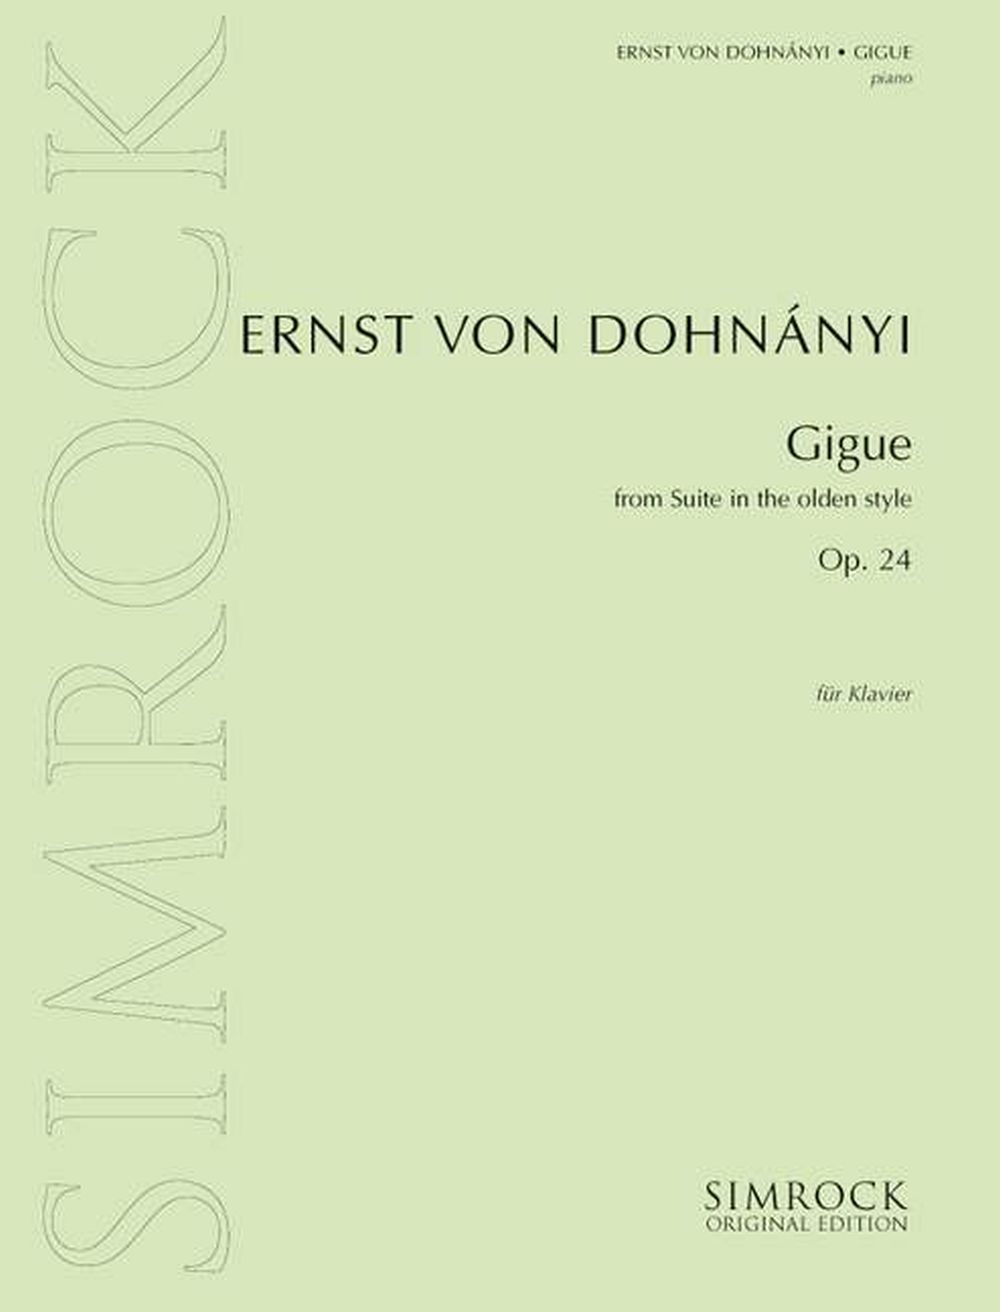 Suite in the Olden Style op. 24: Piano